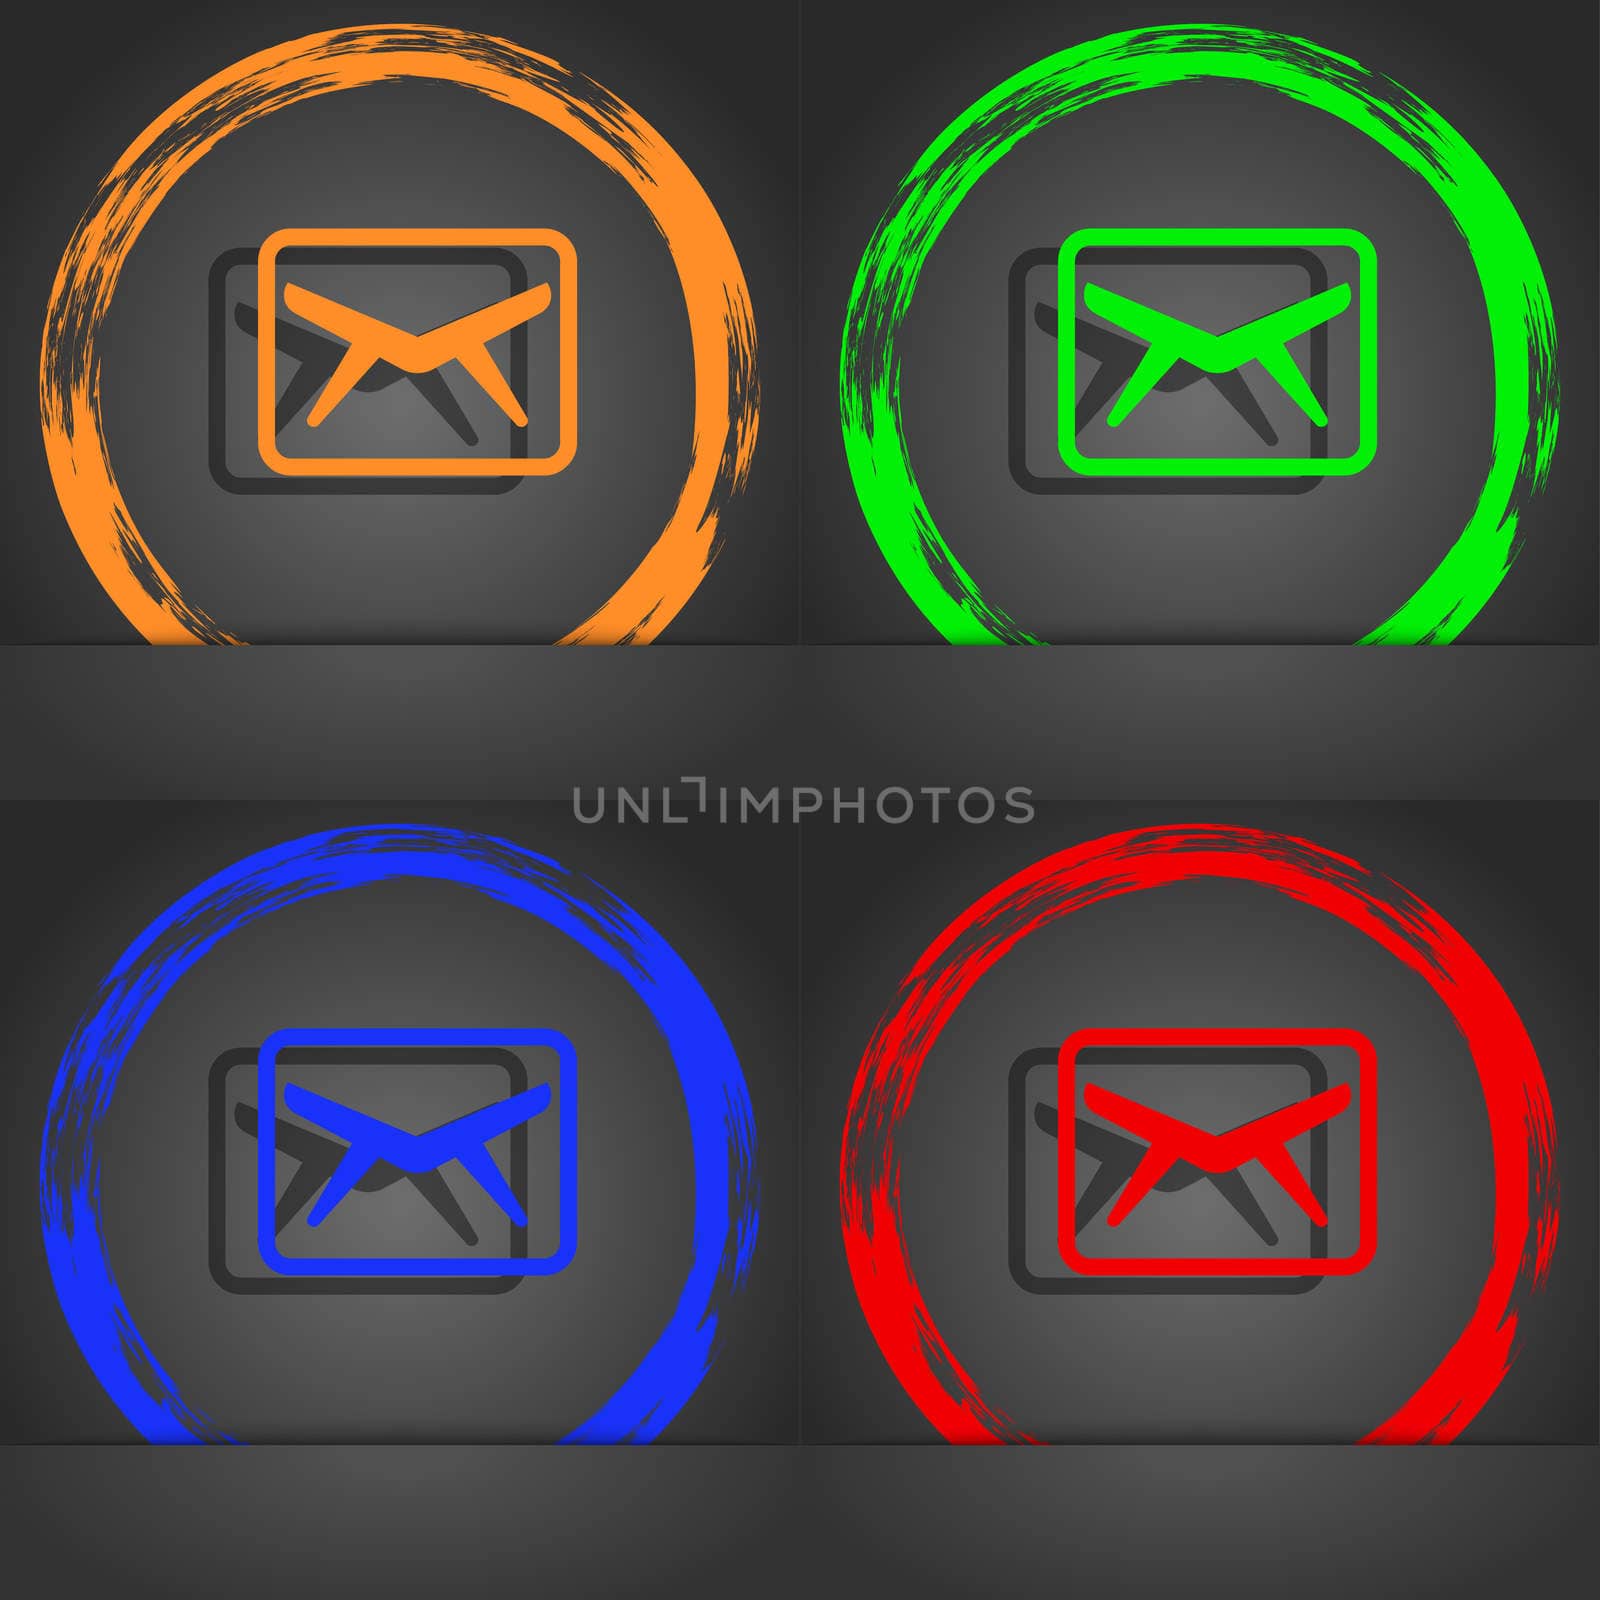 Mail, Envelope, Message icon symbol. Fashionable modern style. In the orange, green, blue, green design.  by serhii_lohvyniuk